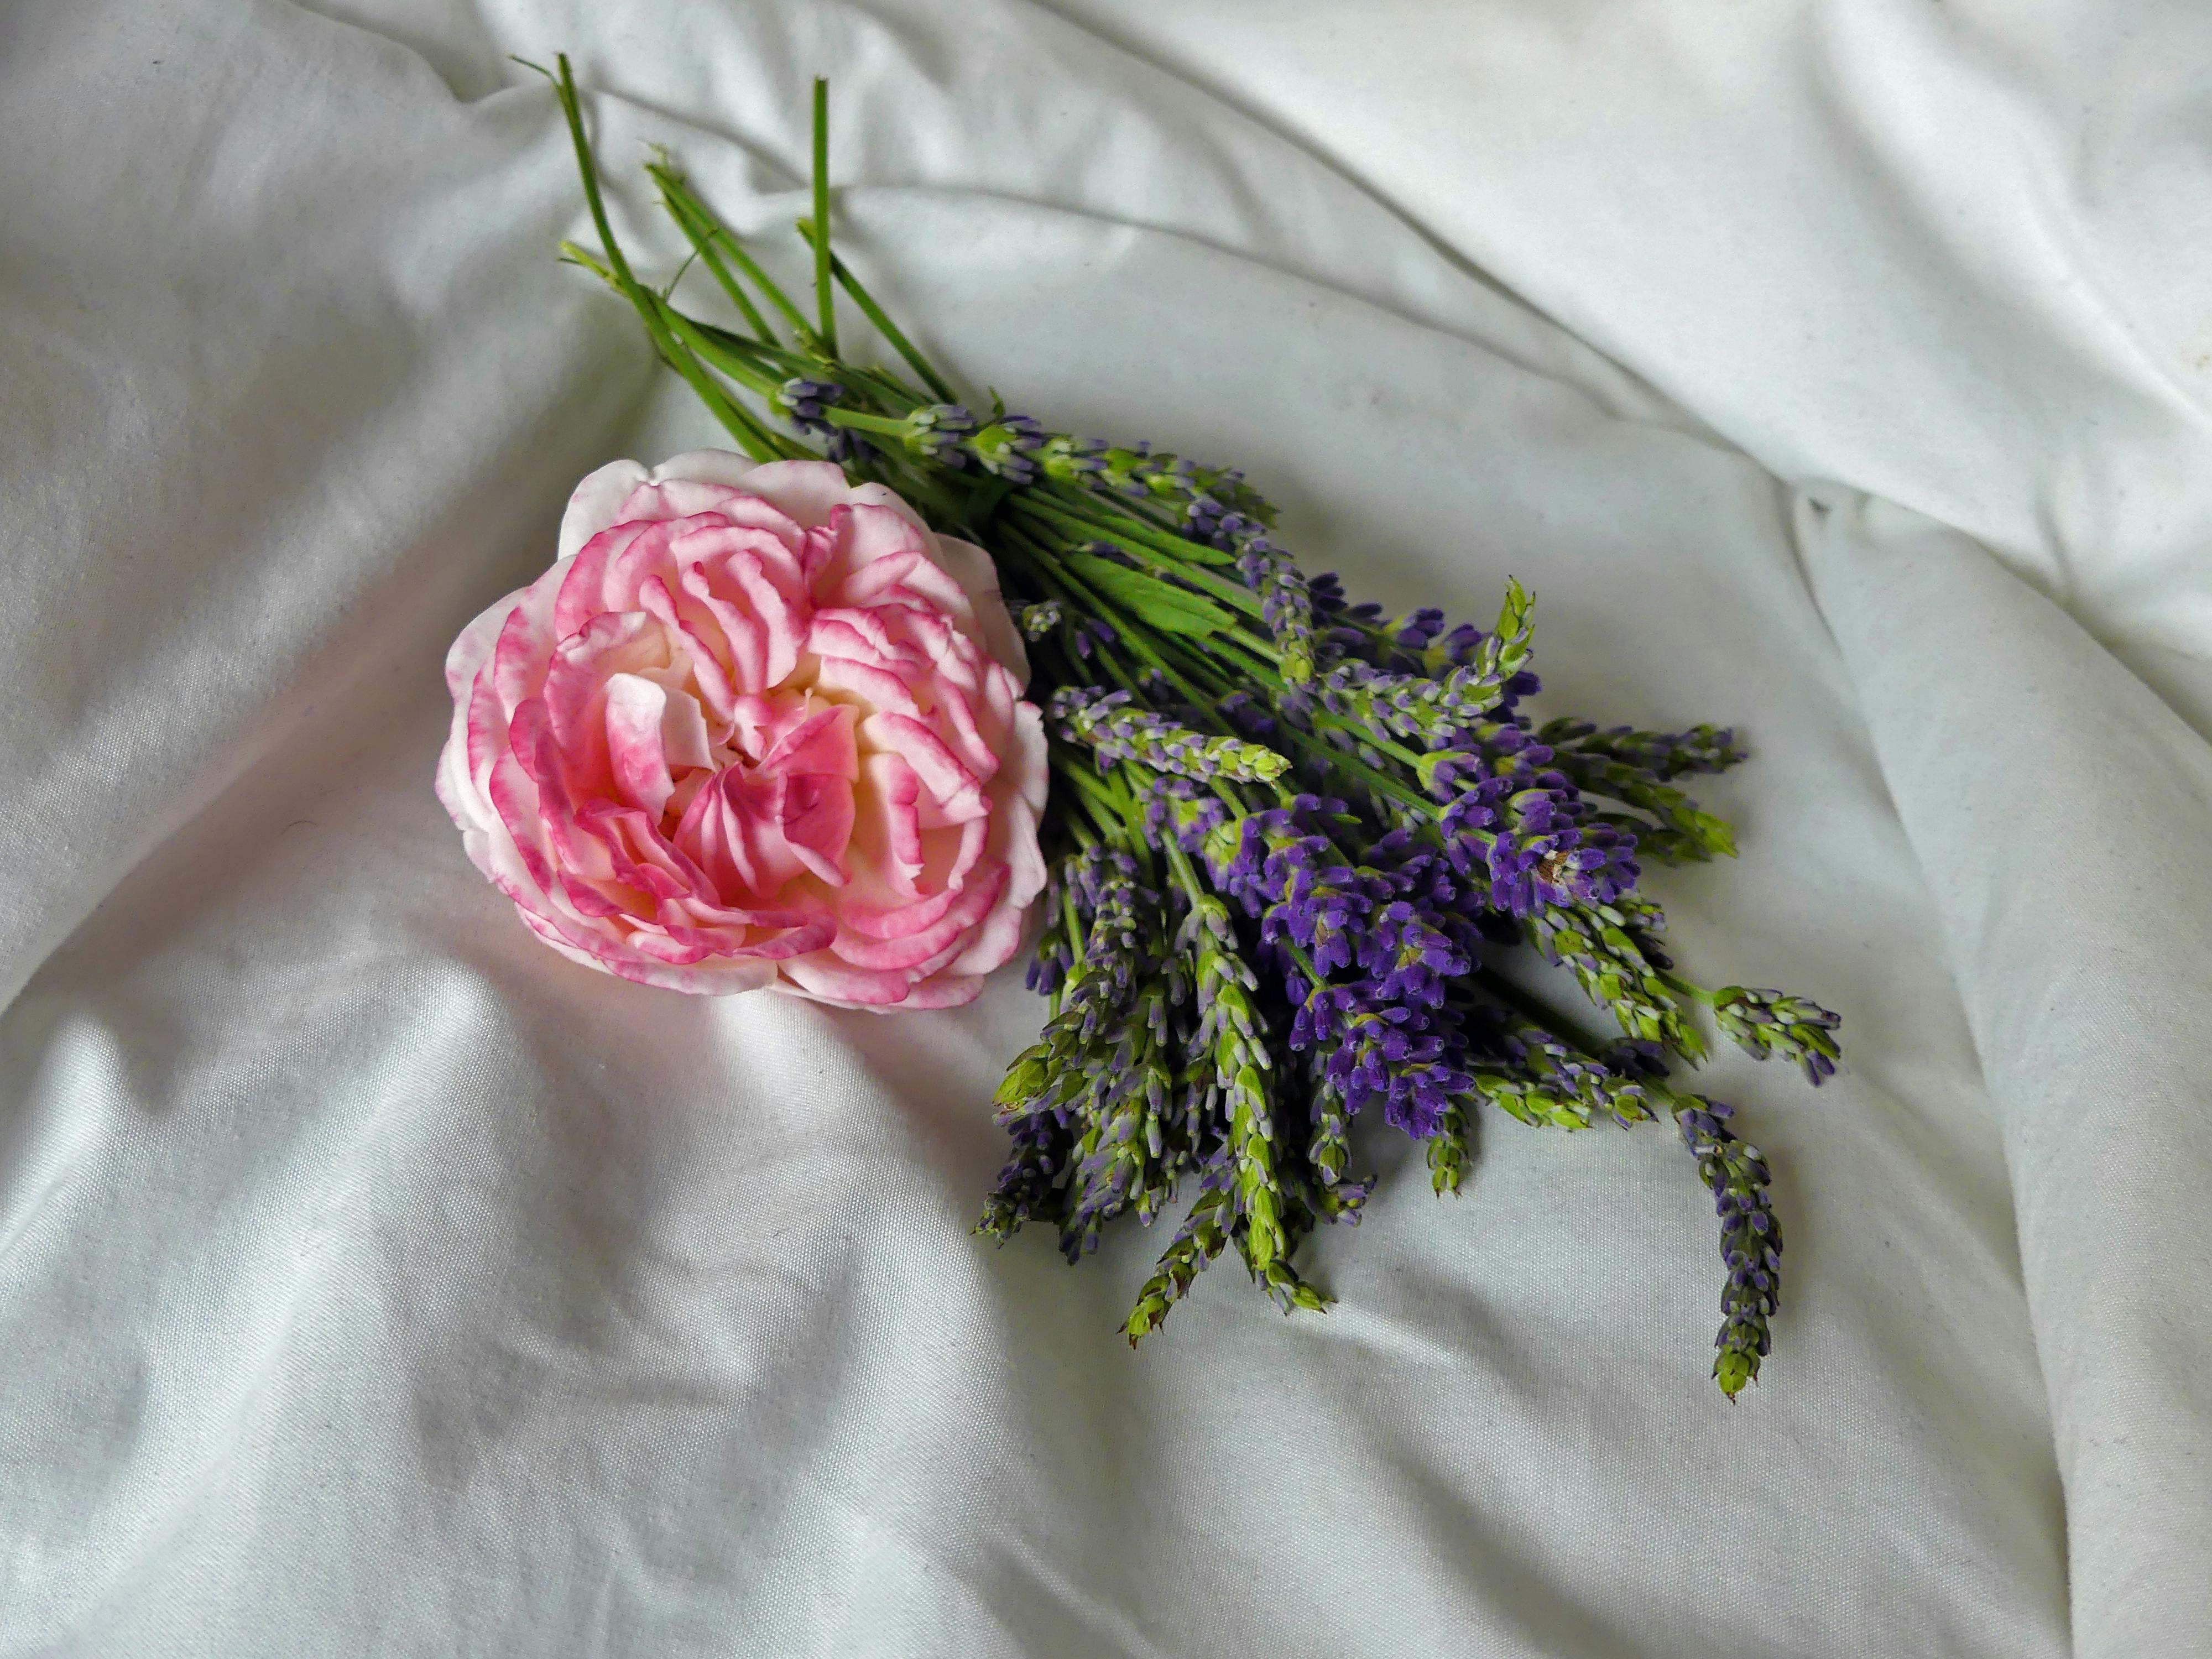 Free stock photo of flowers on bed, Good Morning, lavender